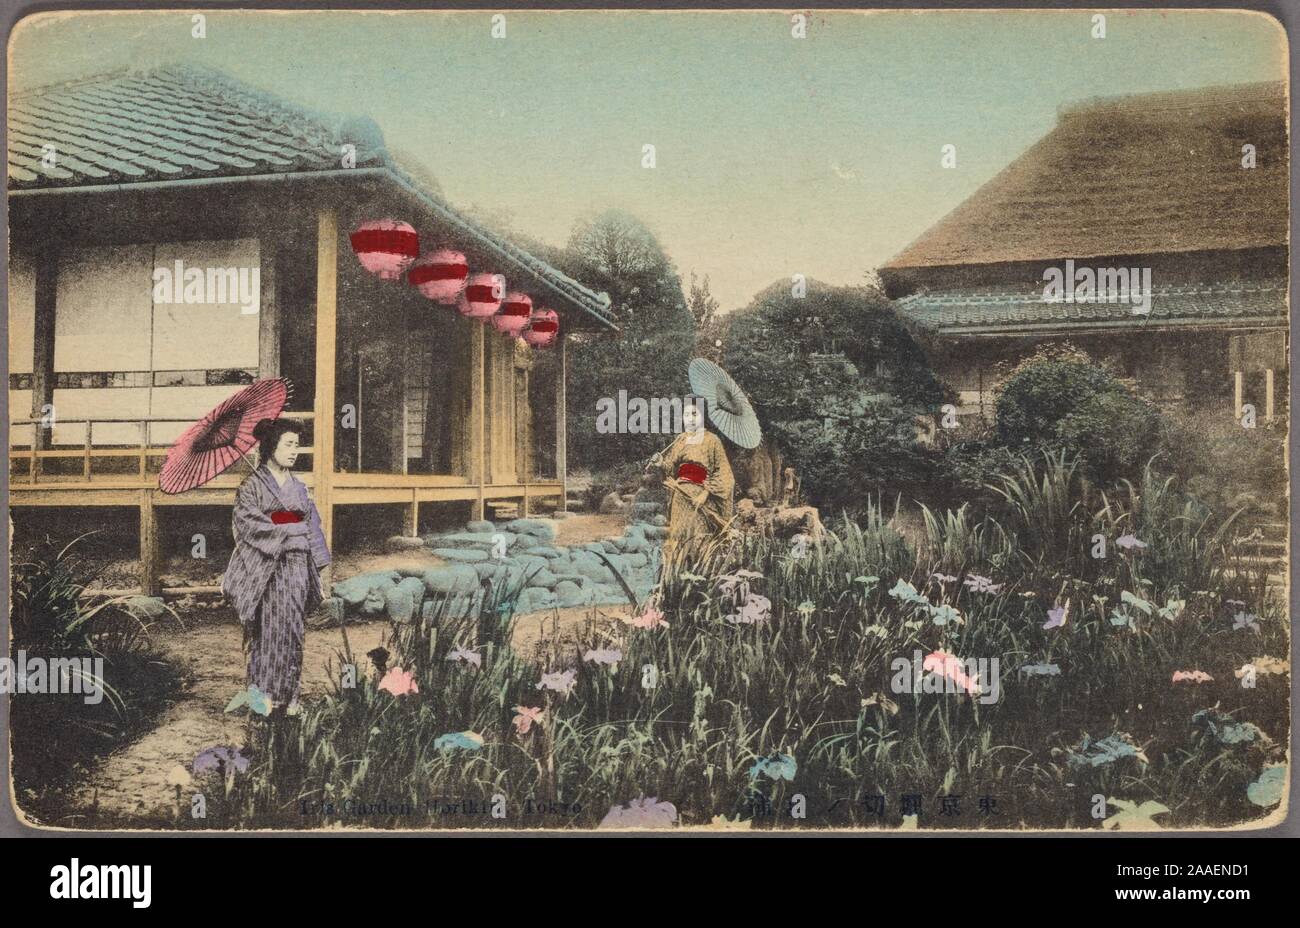 Illustrated postcard of two Japanese women in traditional kimono with parasols walking in a garden, with Japanese-style houses adorned with paper lanterns behind them, Japan, 1912. From the New York Public Library. () Stock Photo